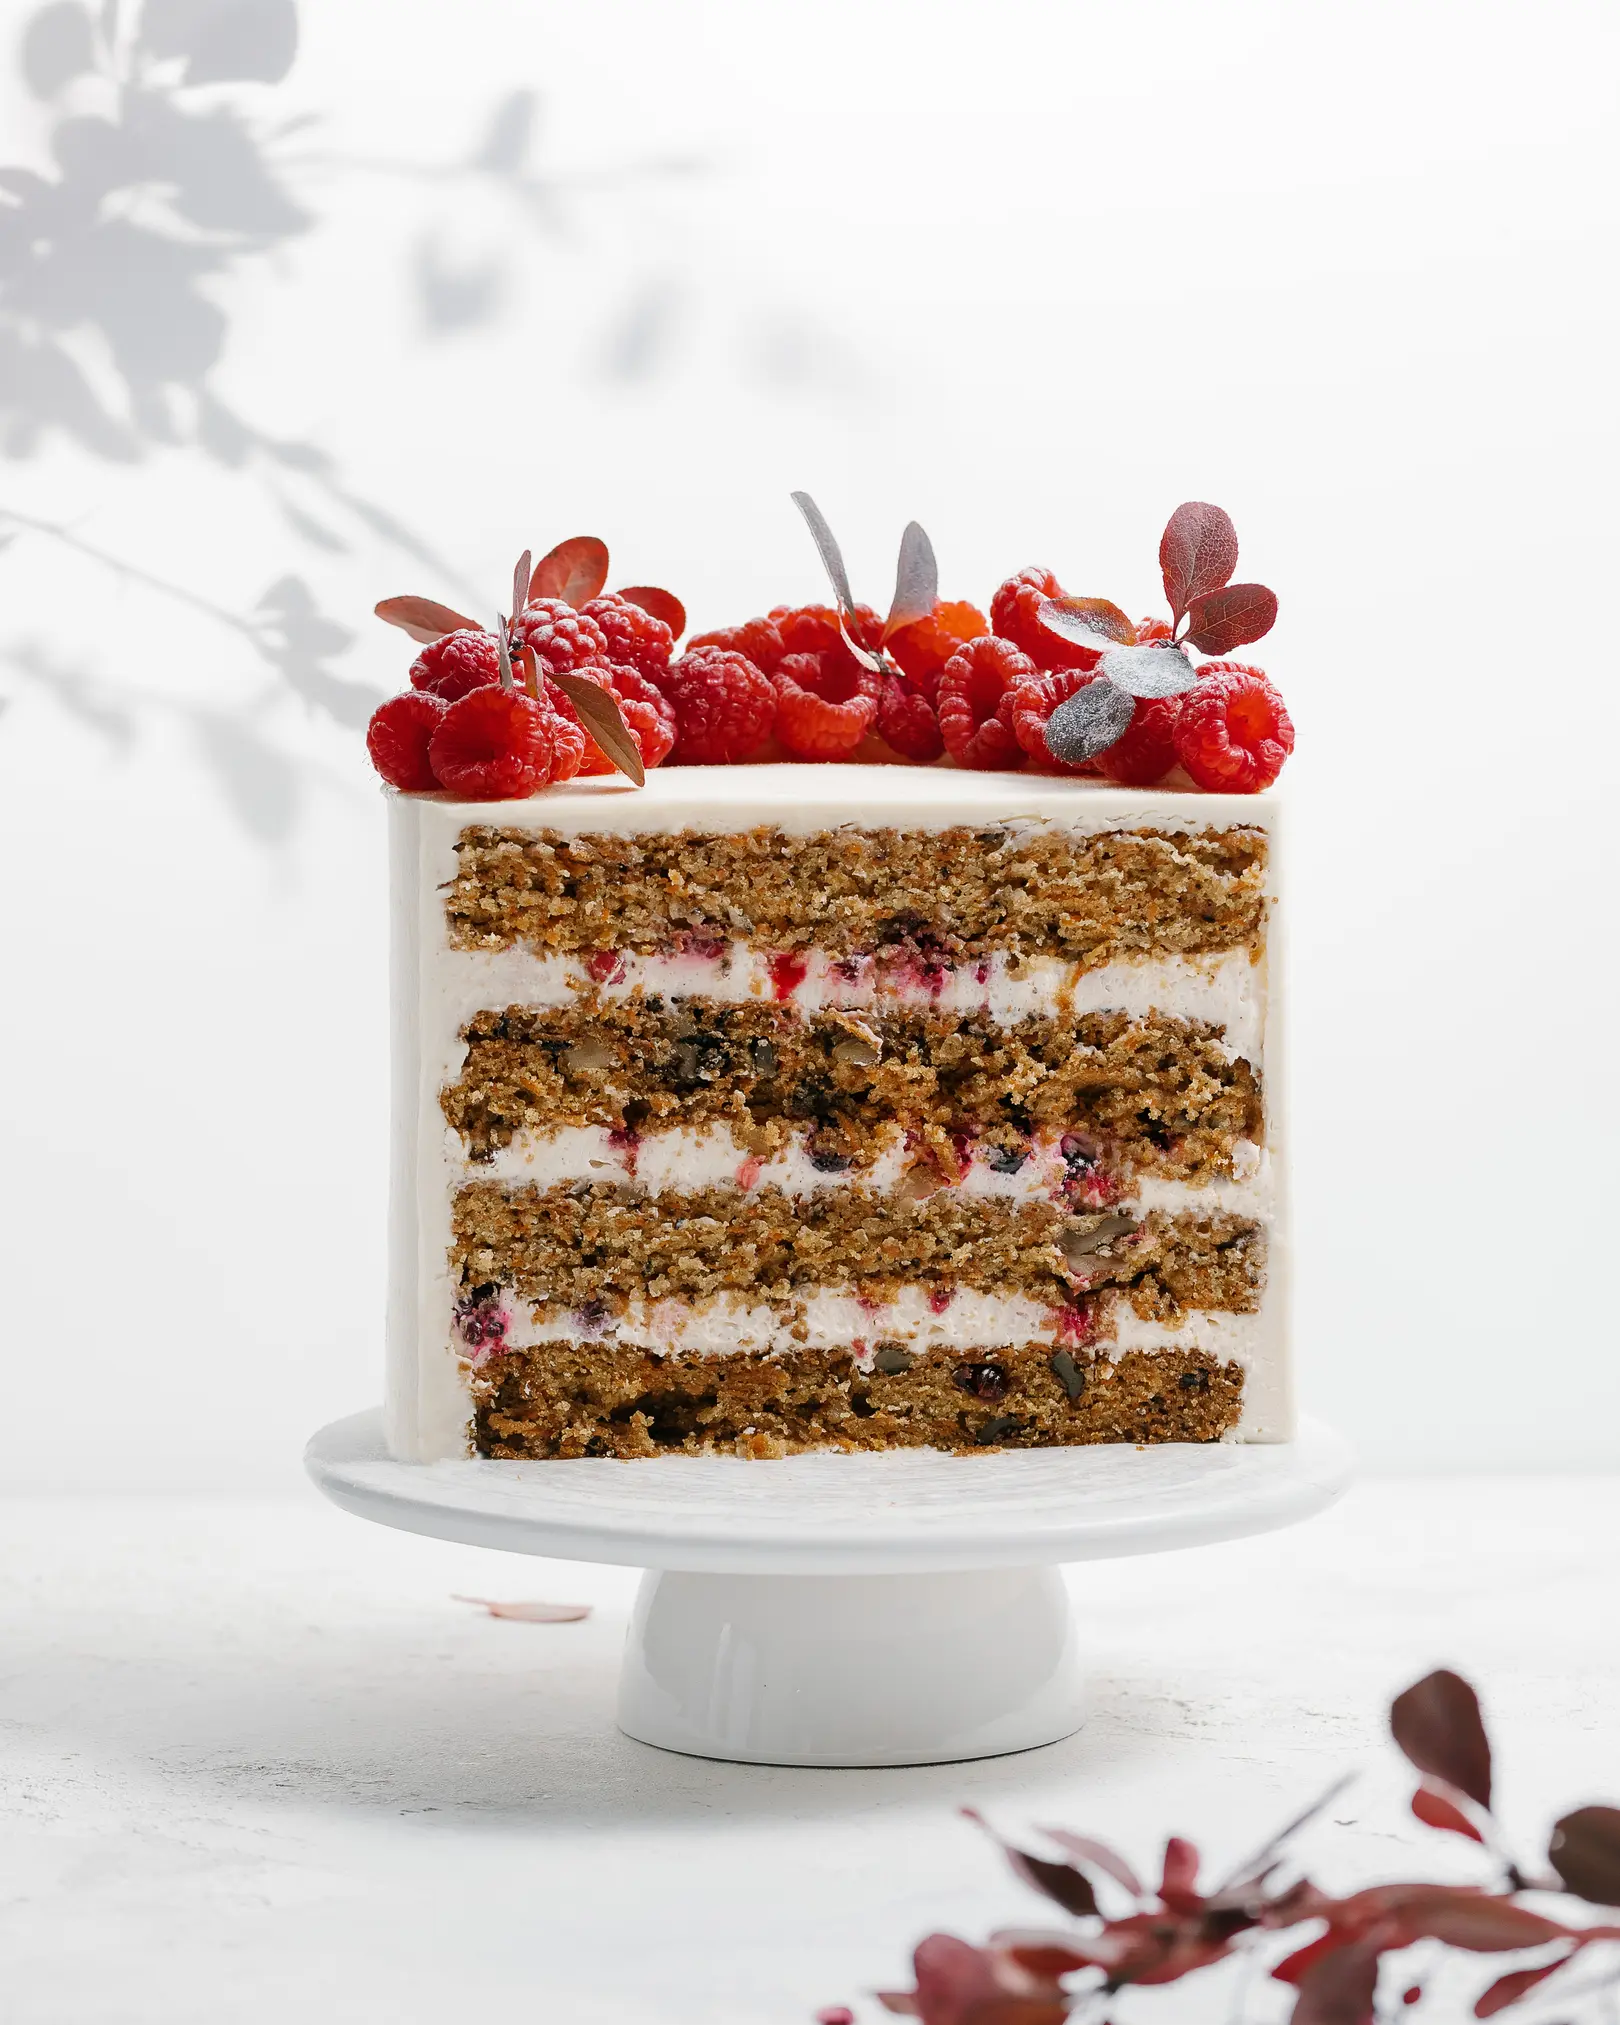 Carrot cake with berries into the layer. There is a cake on the table. It is decorated with raspberries. Visible carrot cakes, creamy layers, and chocolate cream cover the outside of carrot cakes. In the foreground lies a sprig of a plant with red leaves, the same leaves appear through the background.